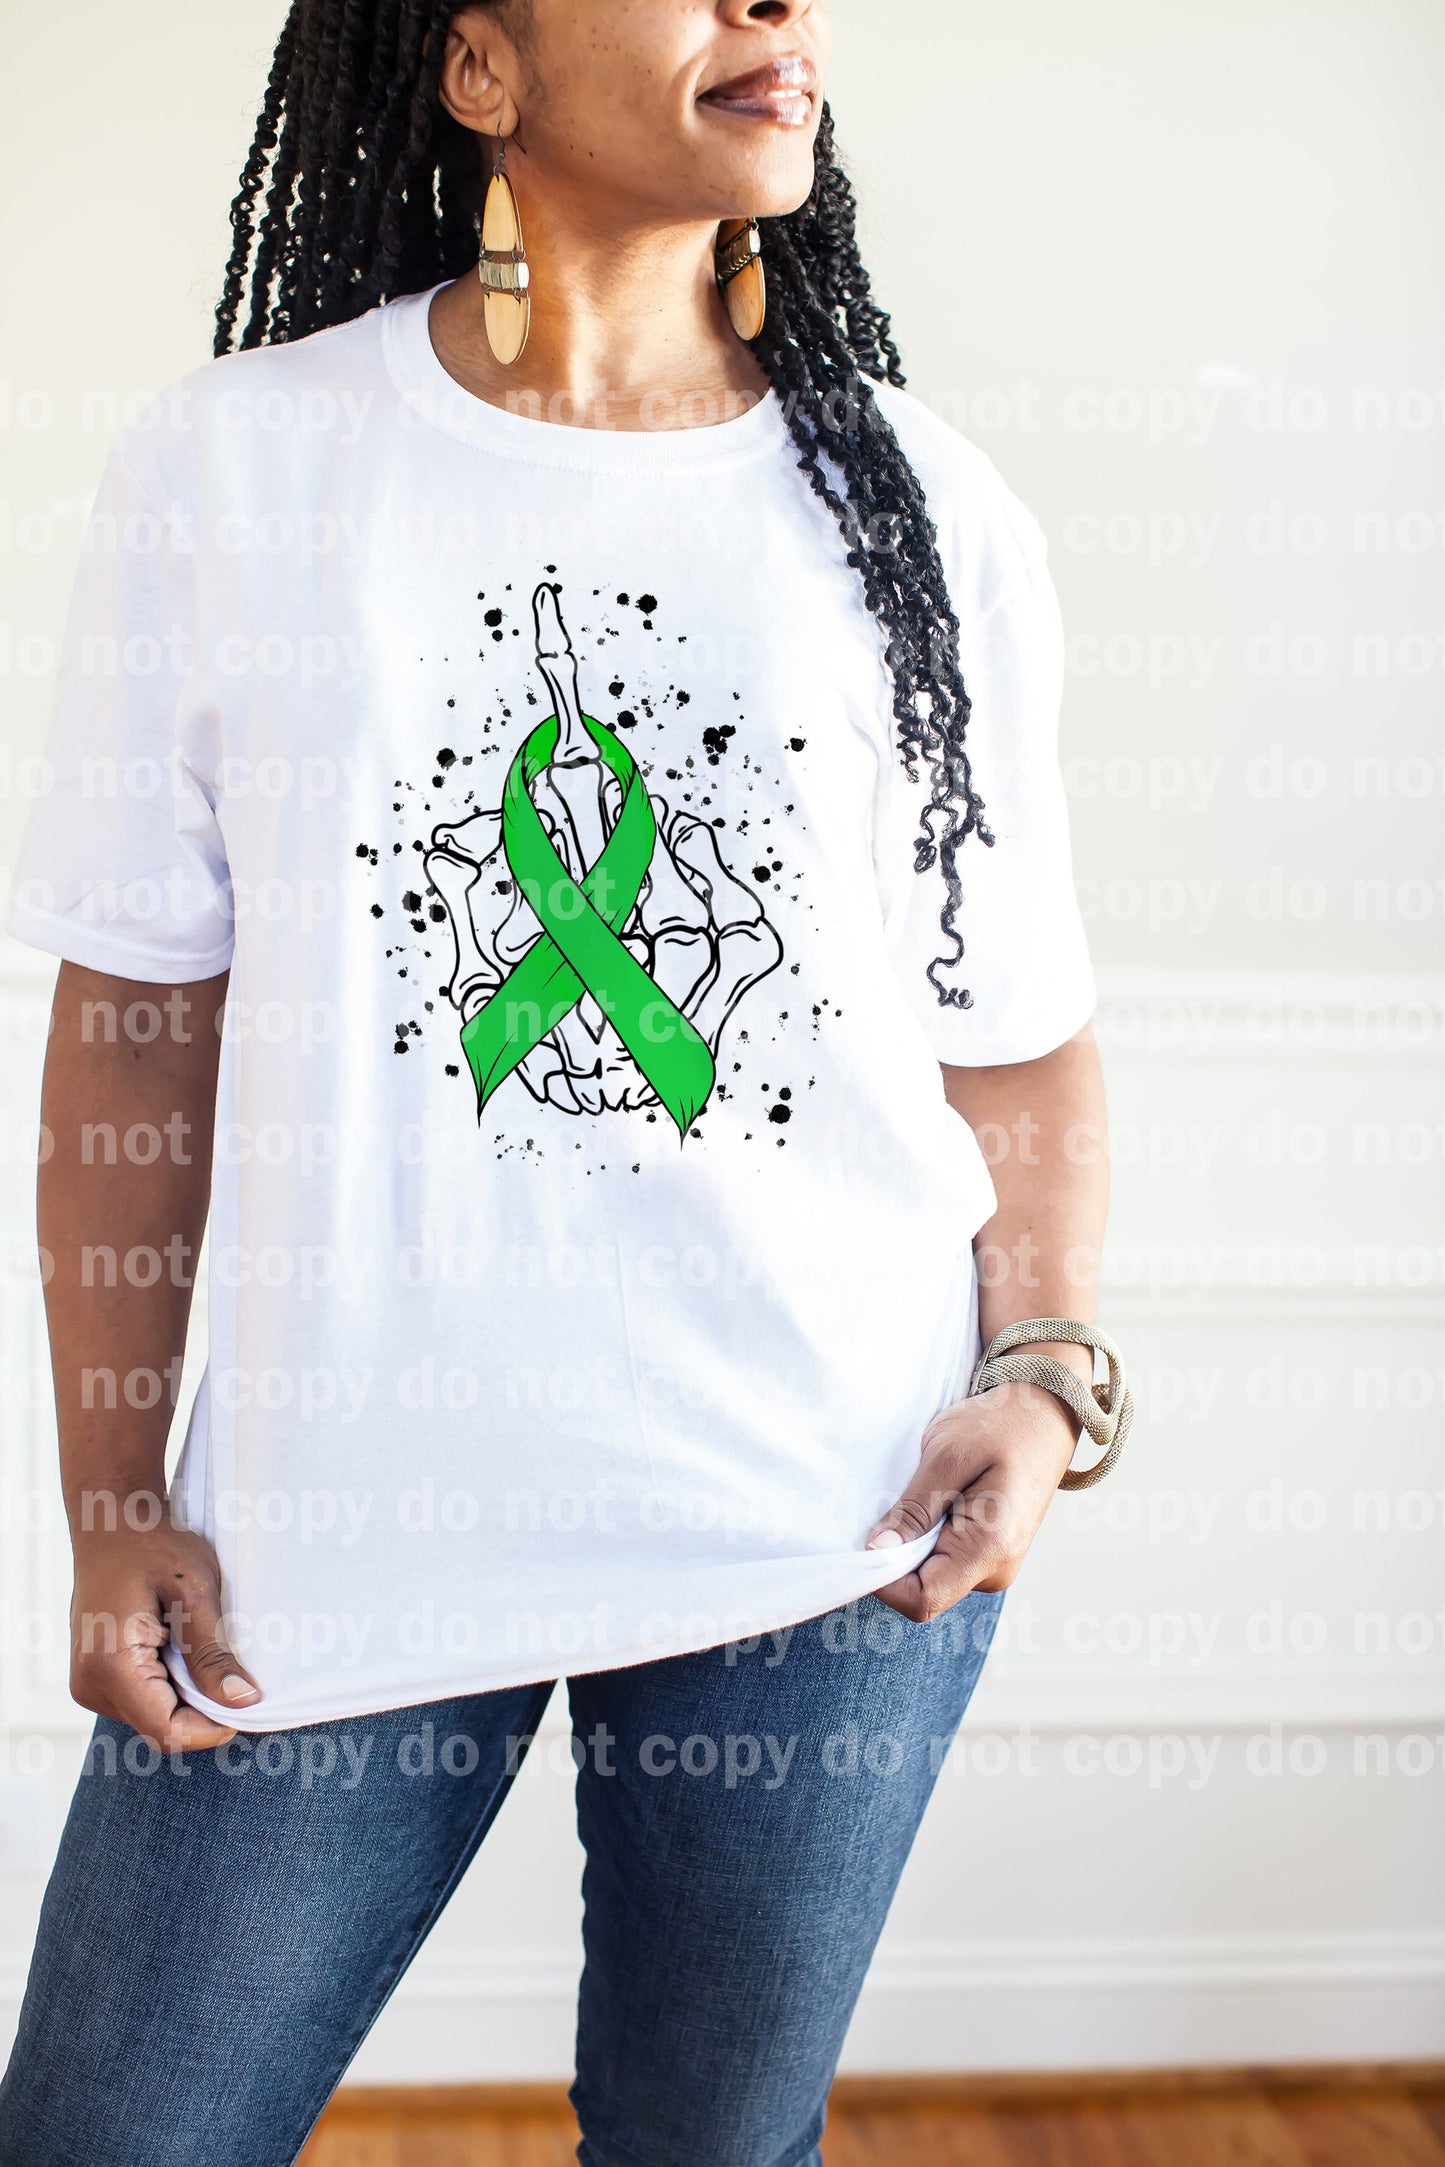 Green Cancer Ribbon Dream Print or Sublimation Print